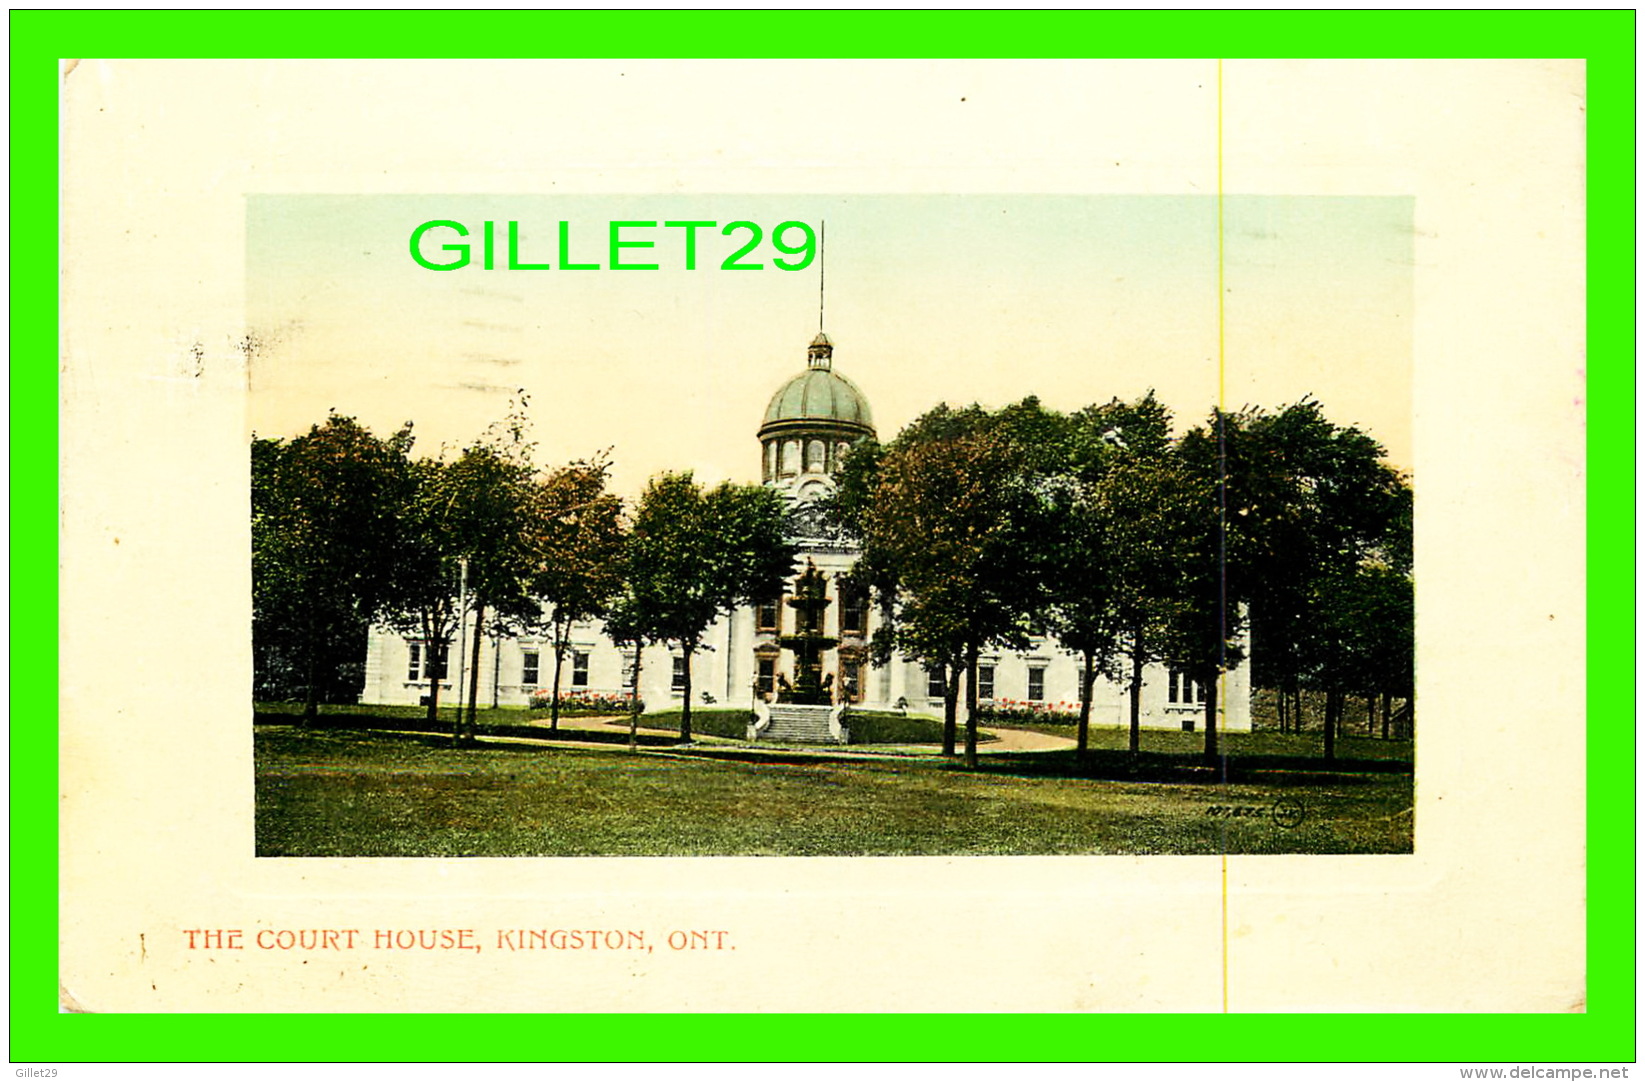 KINGSTON, ONTARIO - THE COURT HOUSE - TRAVEL IN 1911 - THE VALENTINE &amp; SONS PUB CO - - Kingston